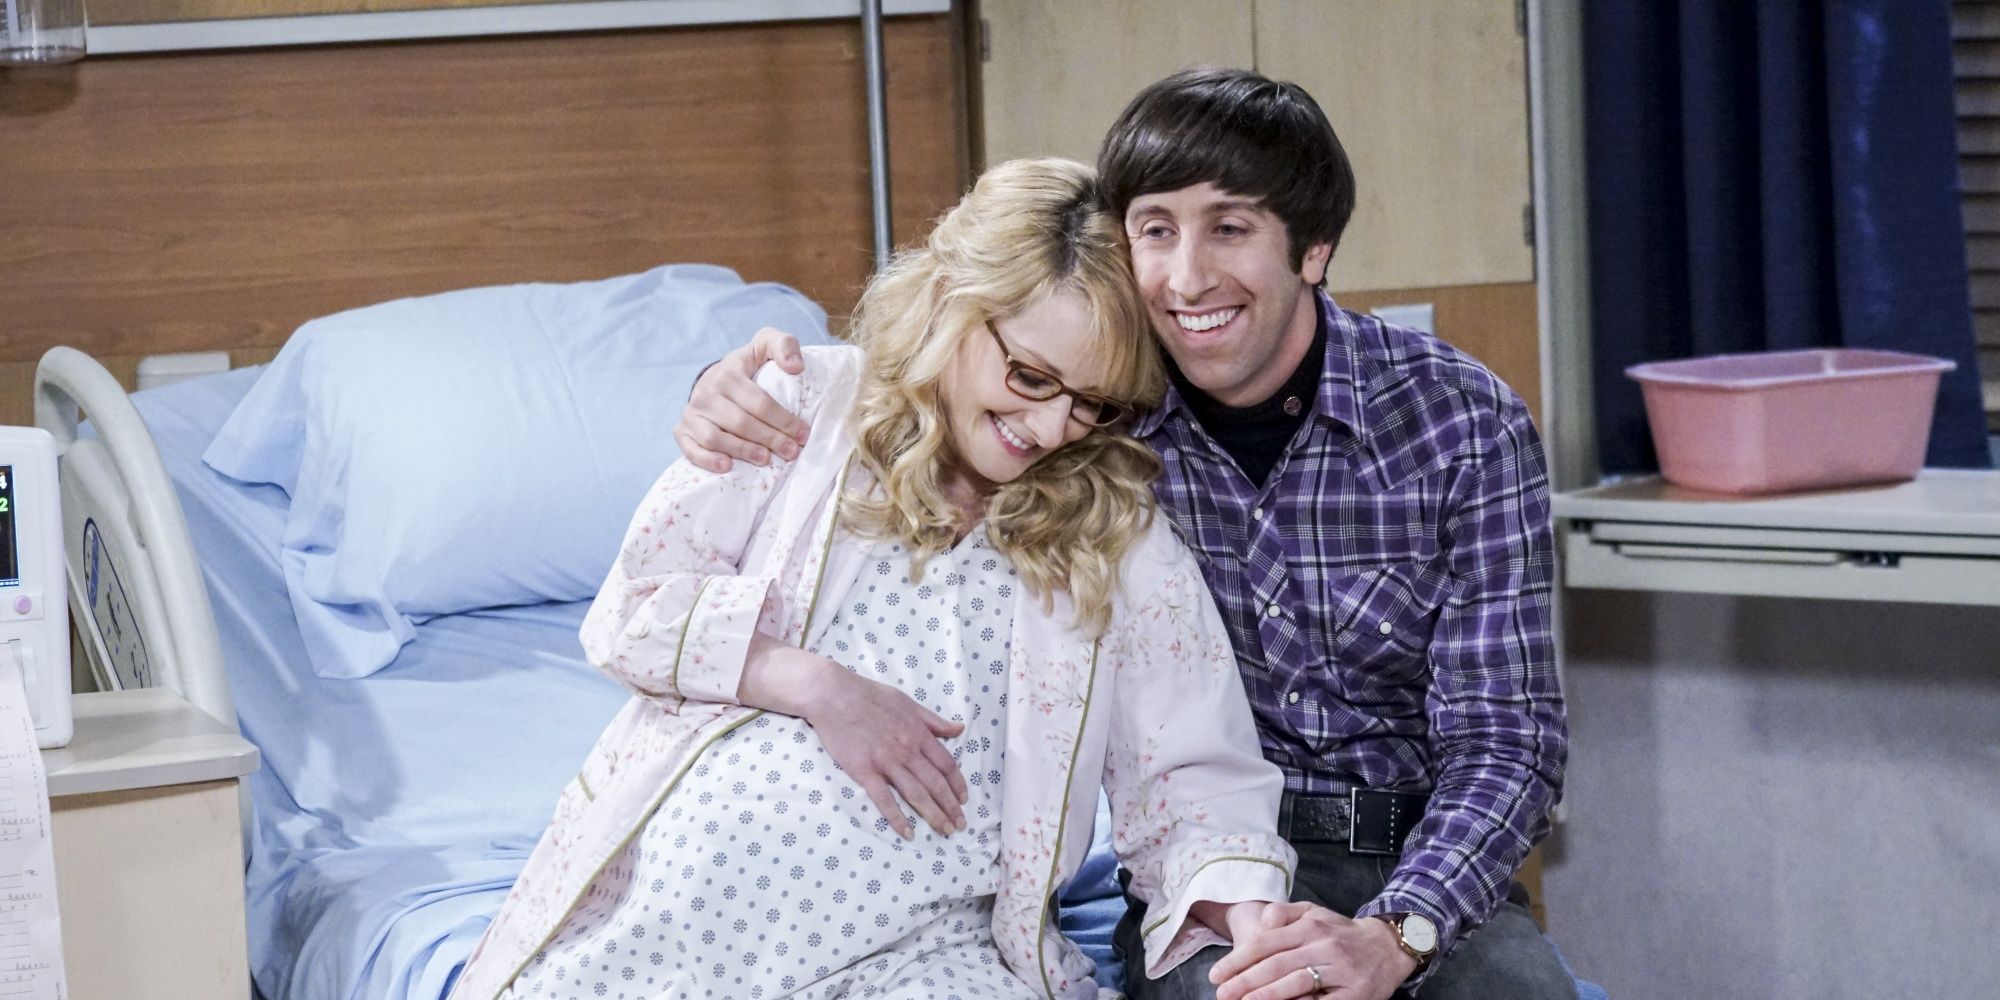 Howard and Bernadette's baby gets born in The Big Bang Theory